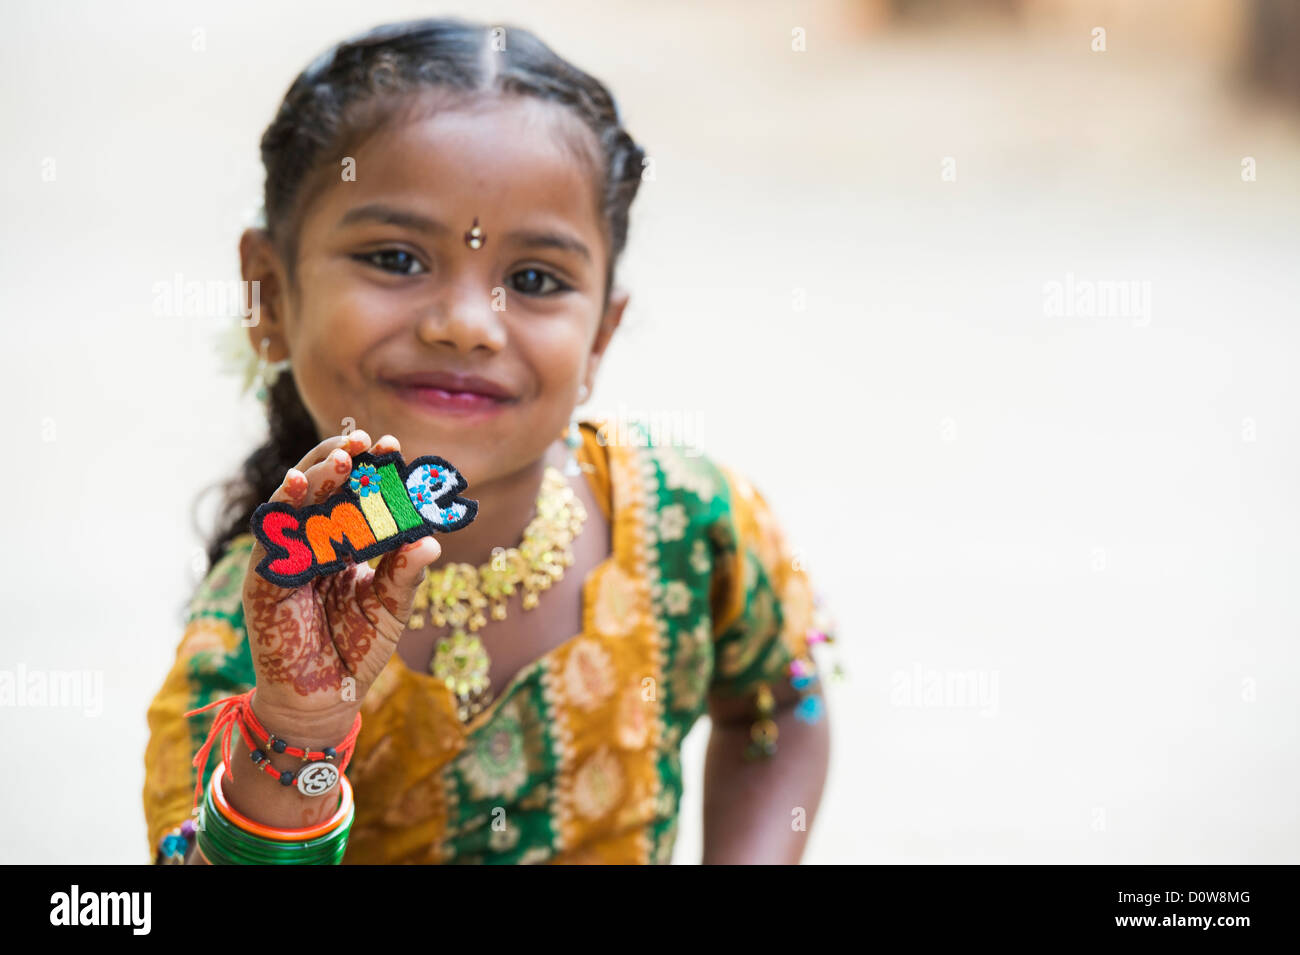 Smiling Indian girl holding a SMILE multicoloured embroidery patch. Andhra Pradesh, India Stock Photo